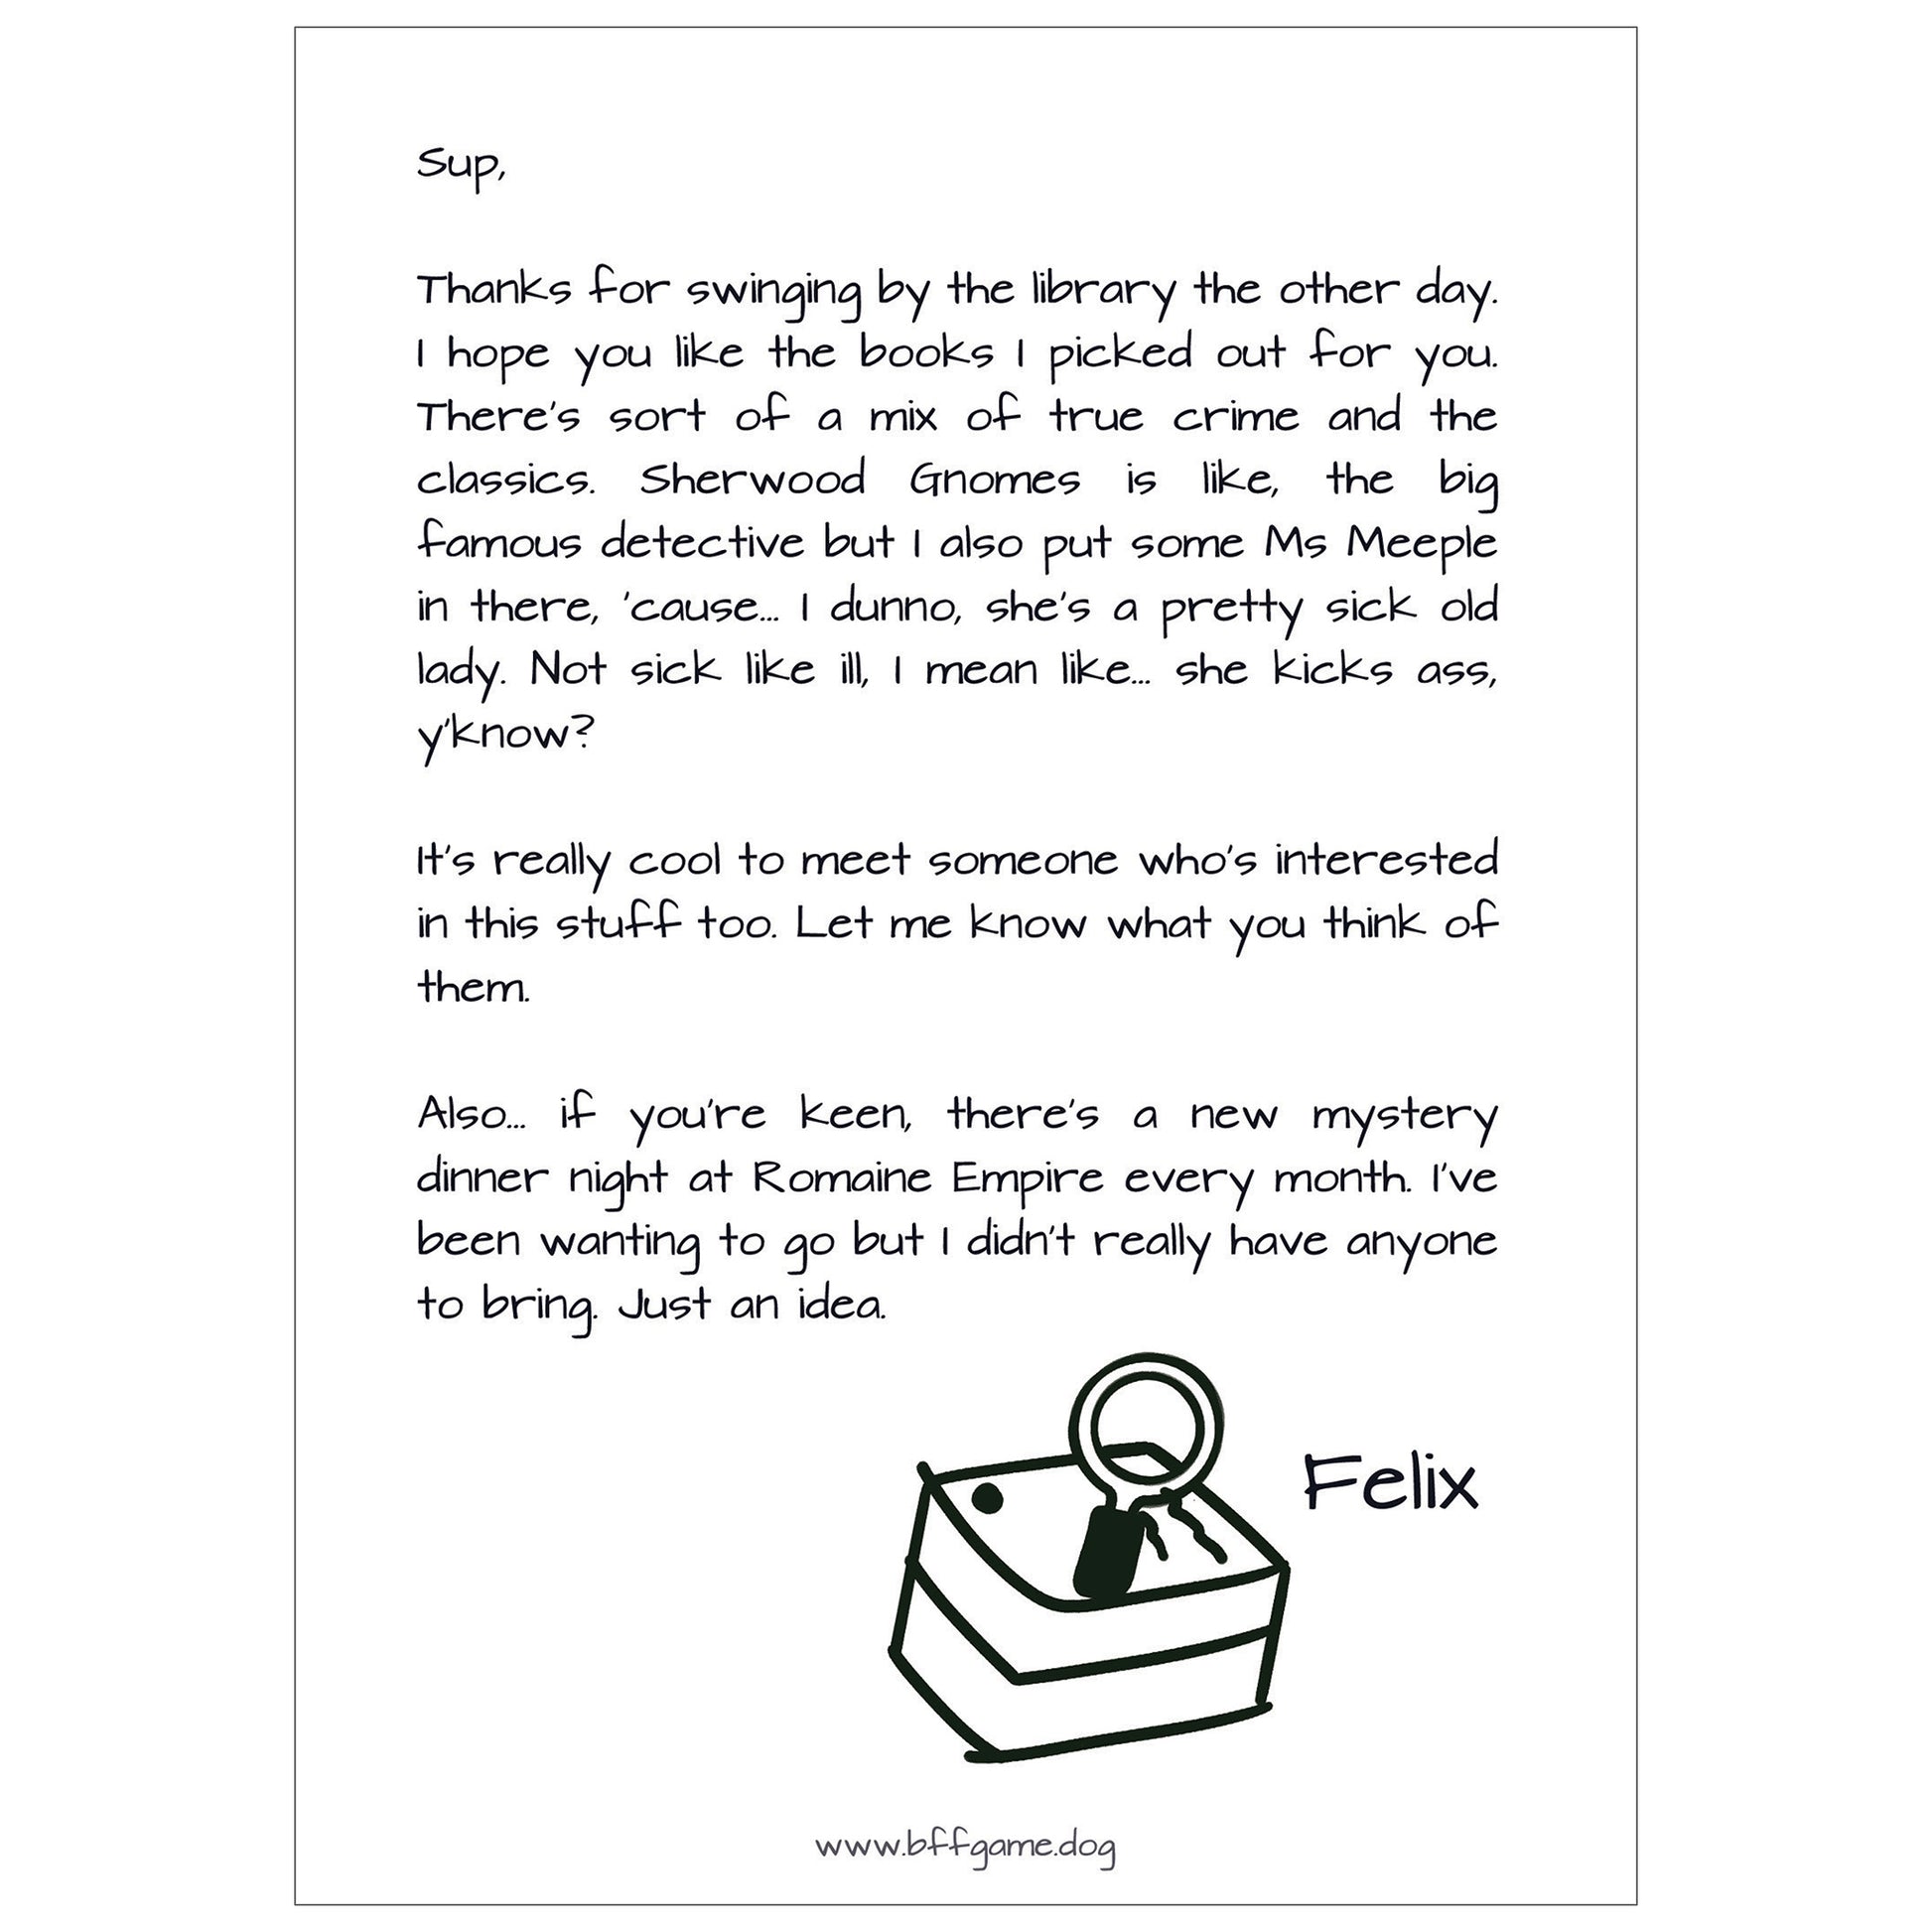 Mockup of a letter with salutation: "Sup," and signed "Felix" with a drawing of a magnifying glass. White background.